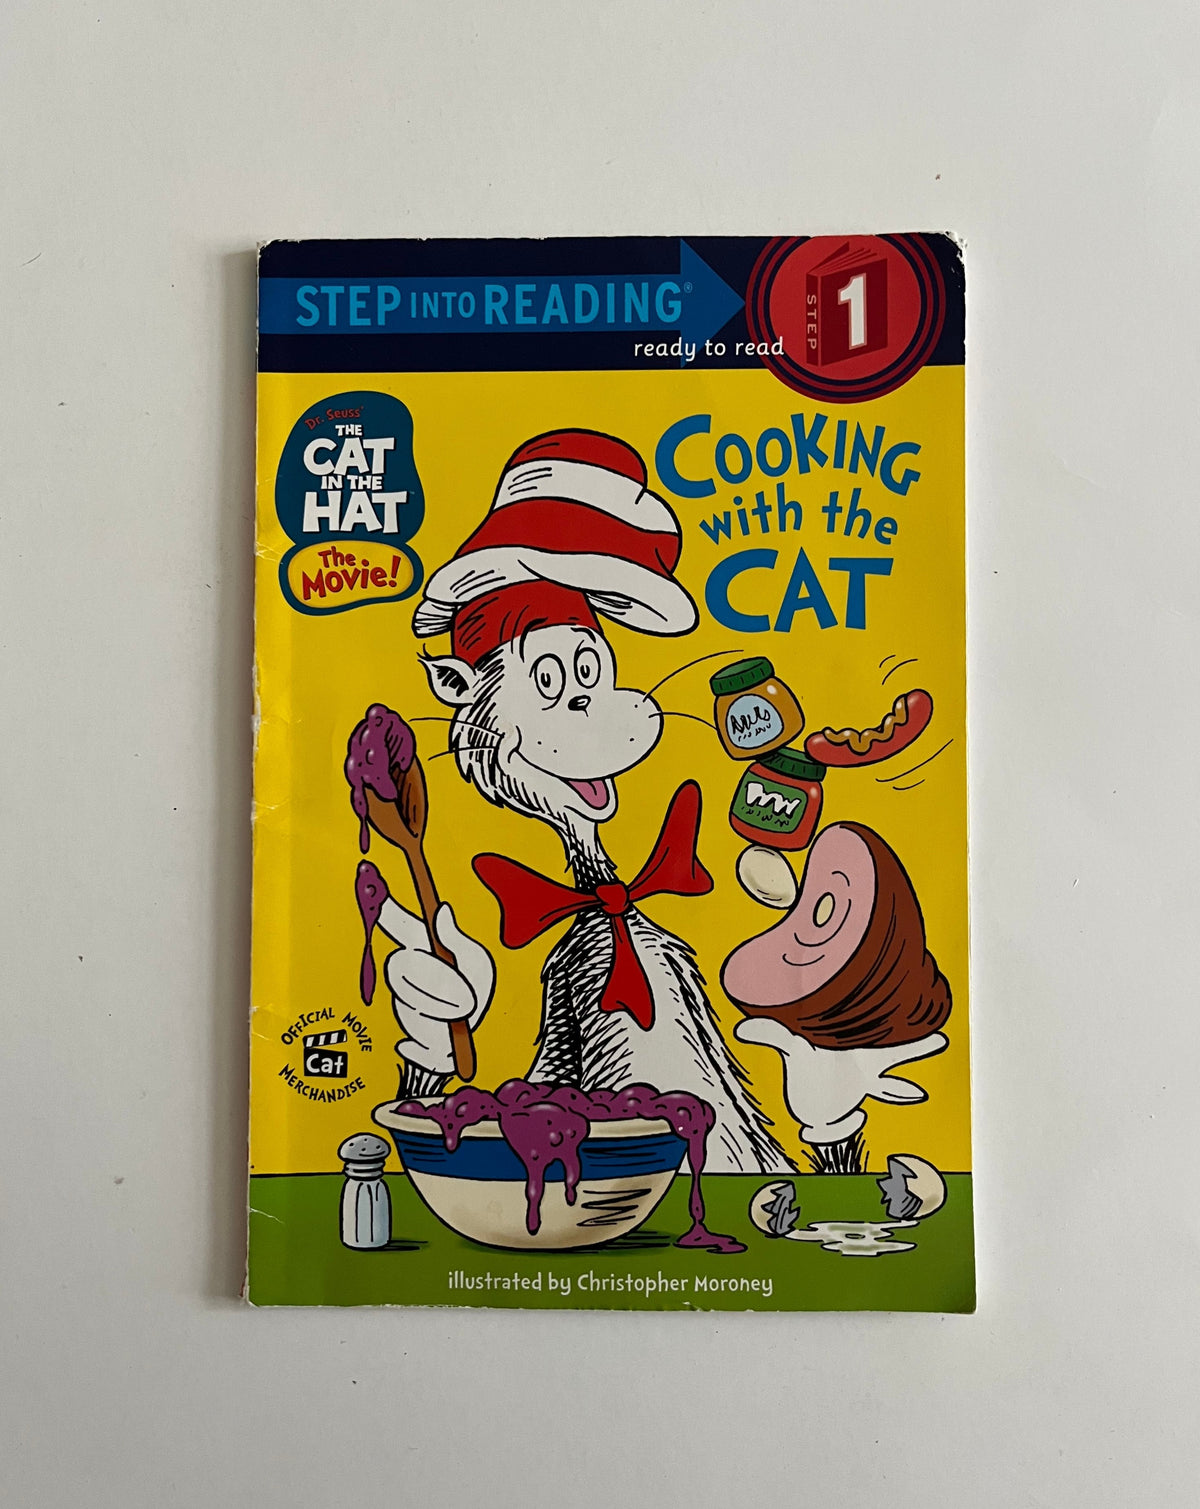 The Cat in the Hat: Cooking with the Cat